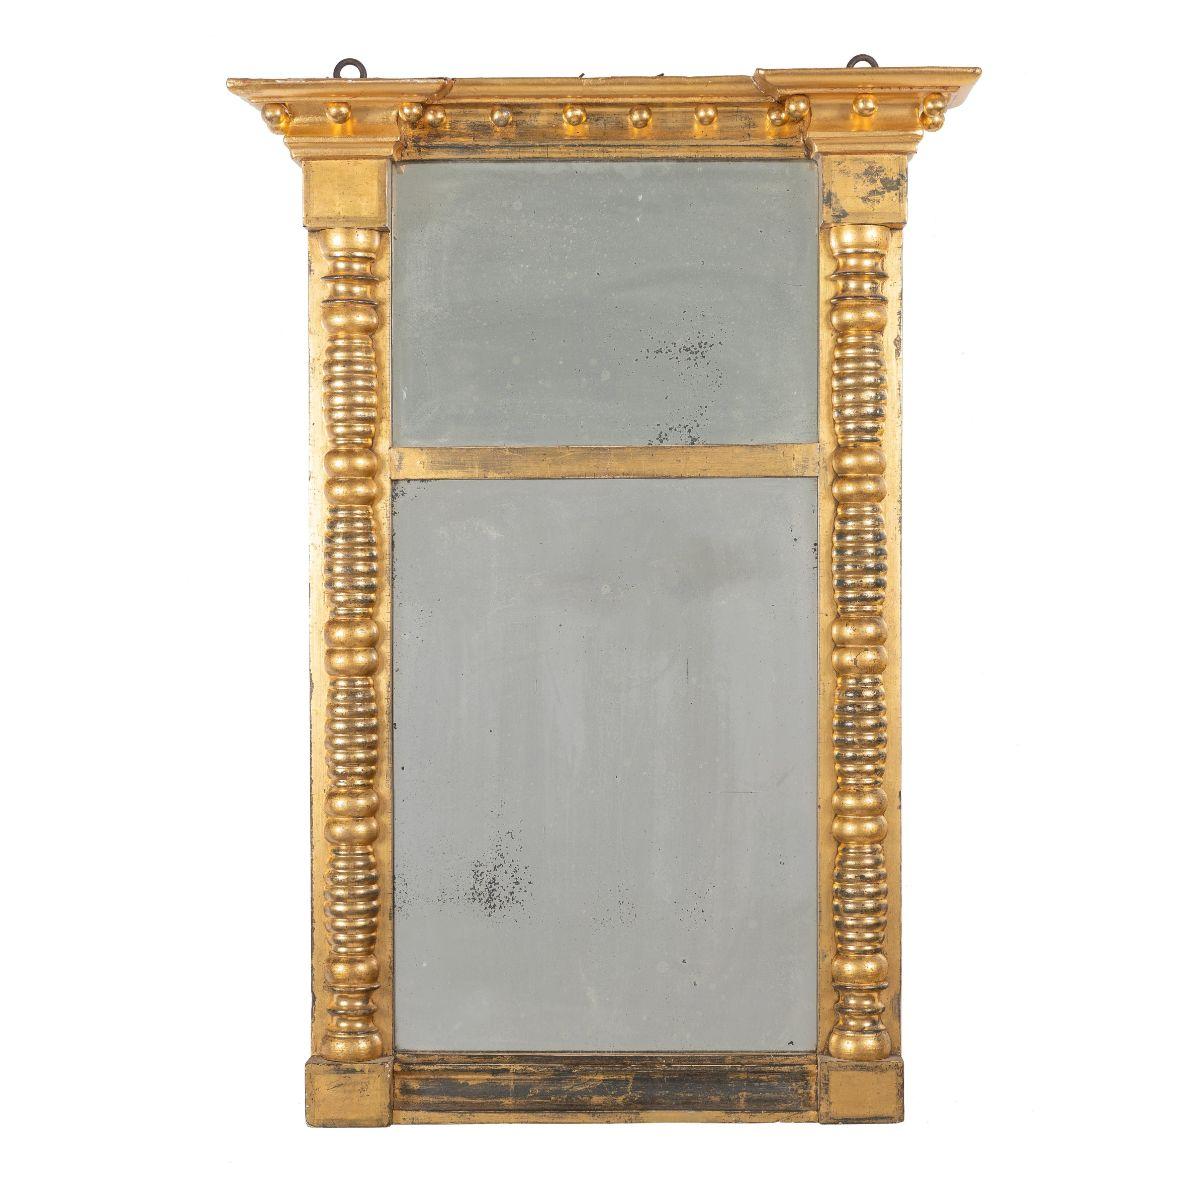 Early 19th Century American New England Gilt Tabernacle Pier Mirror In Good Condition For Sale In Kenilworth, IL